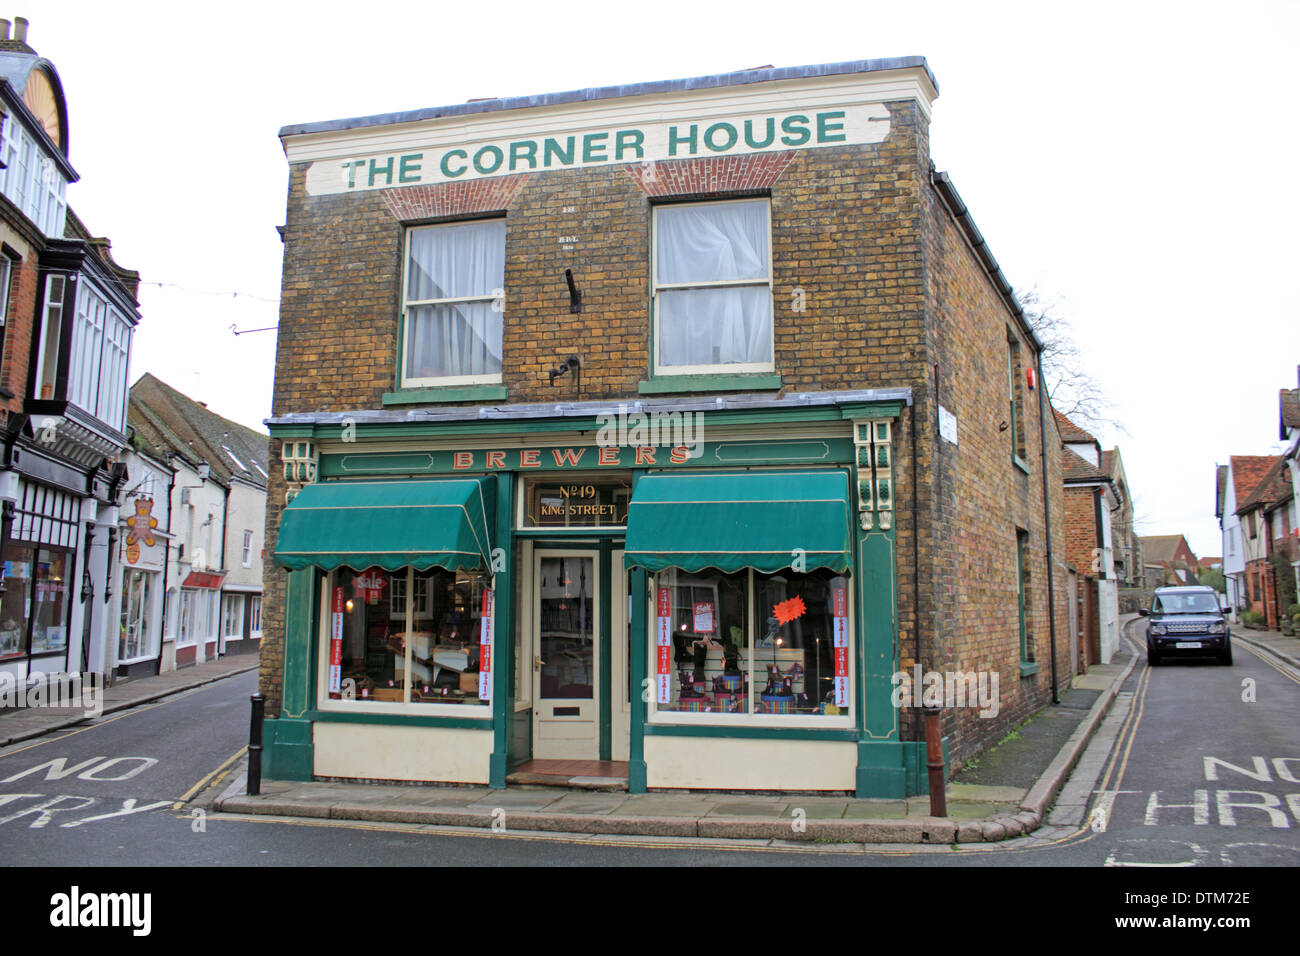 The Corner House shop in historic town of Sandwich, Kent, England, UK. Stock Photo